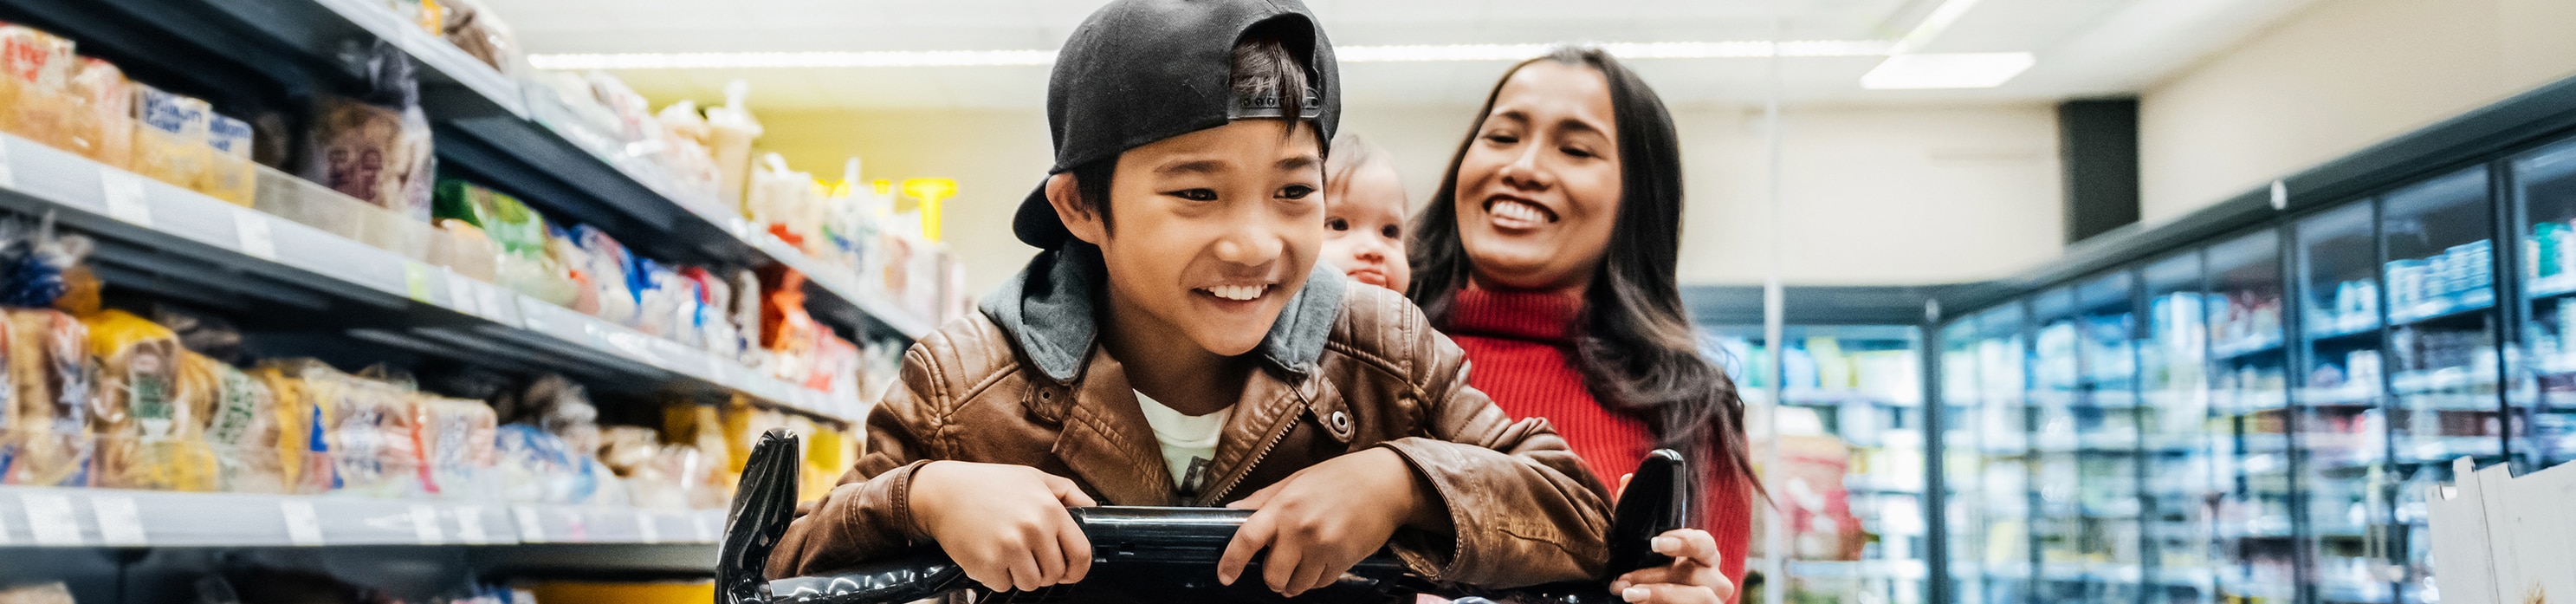 Smiling parent pushing their child on a shopping cart at a grocery store